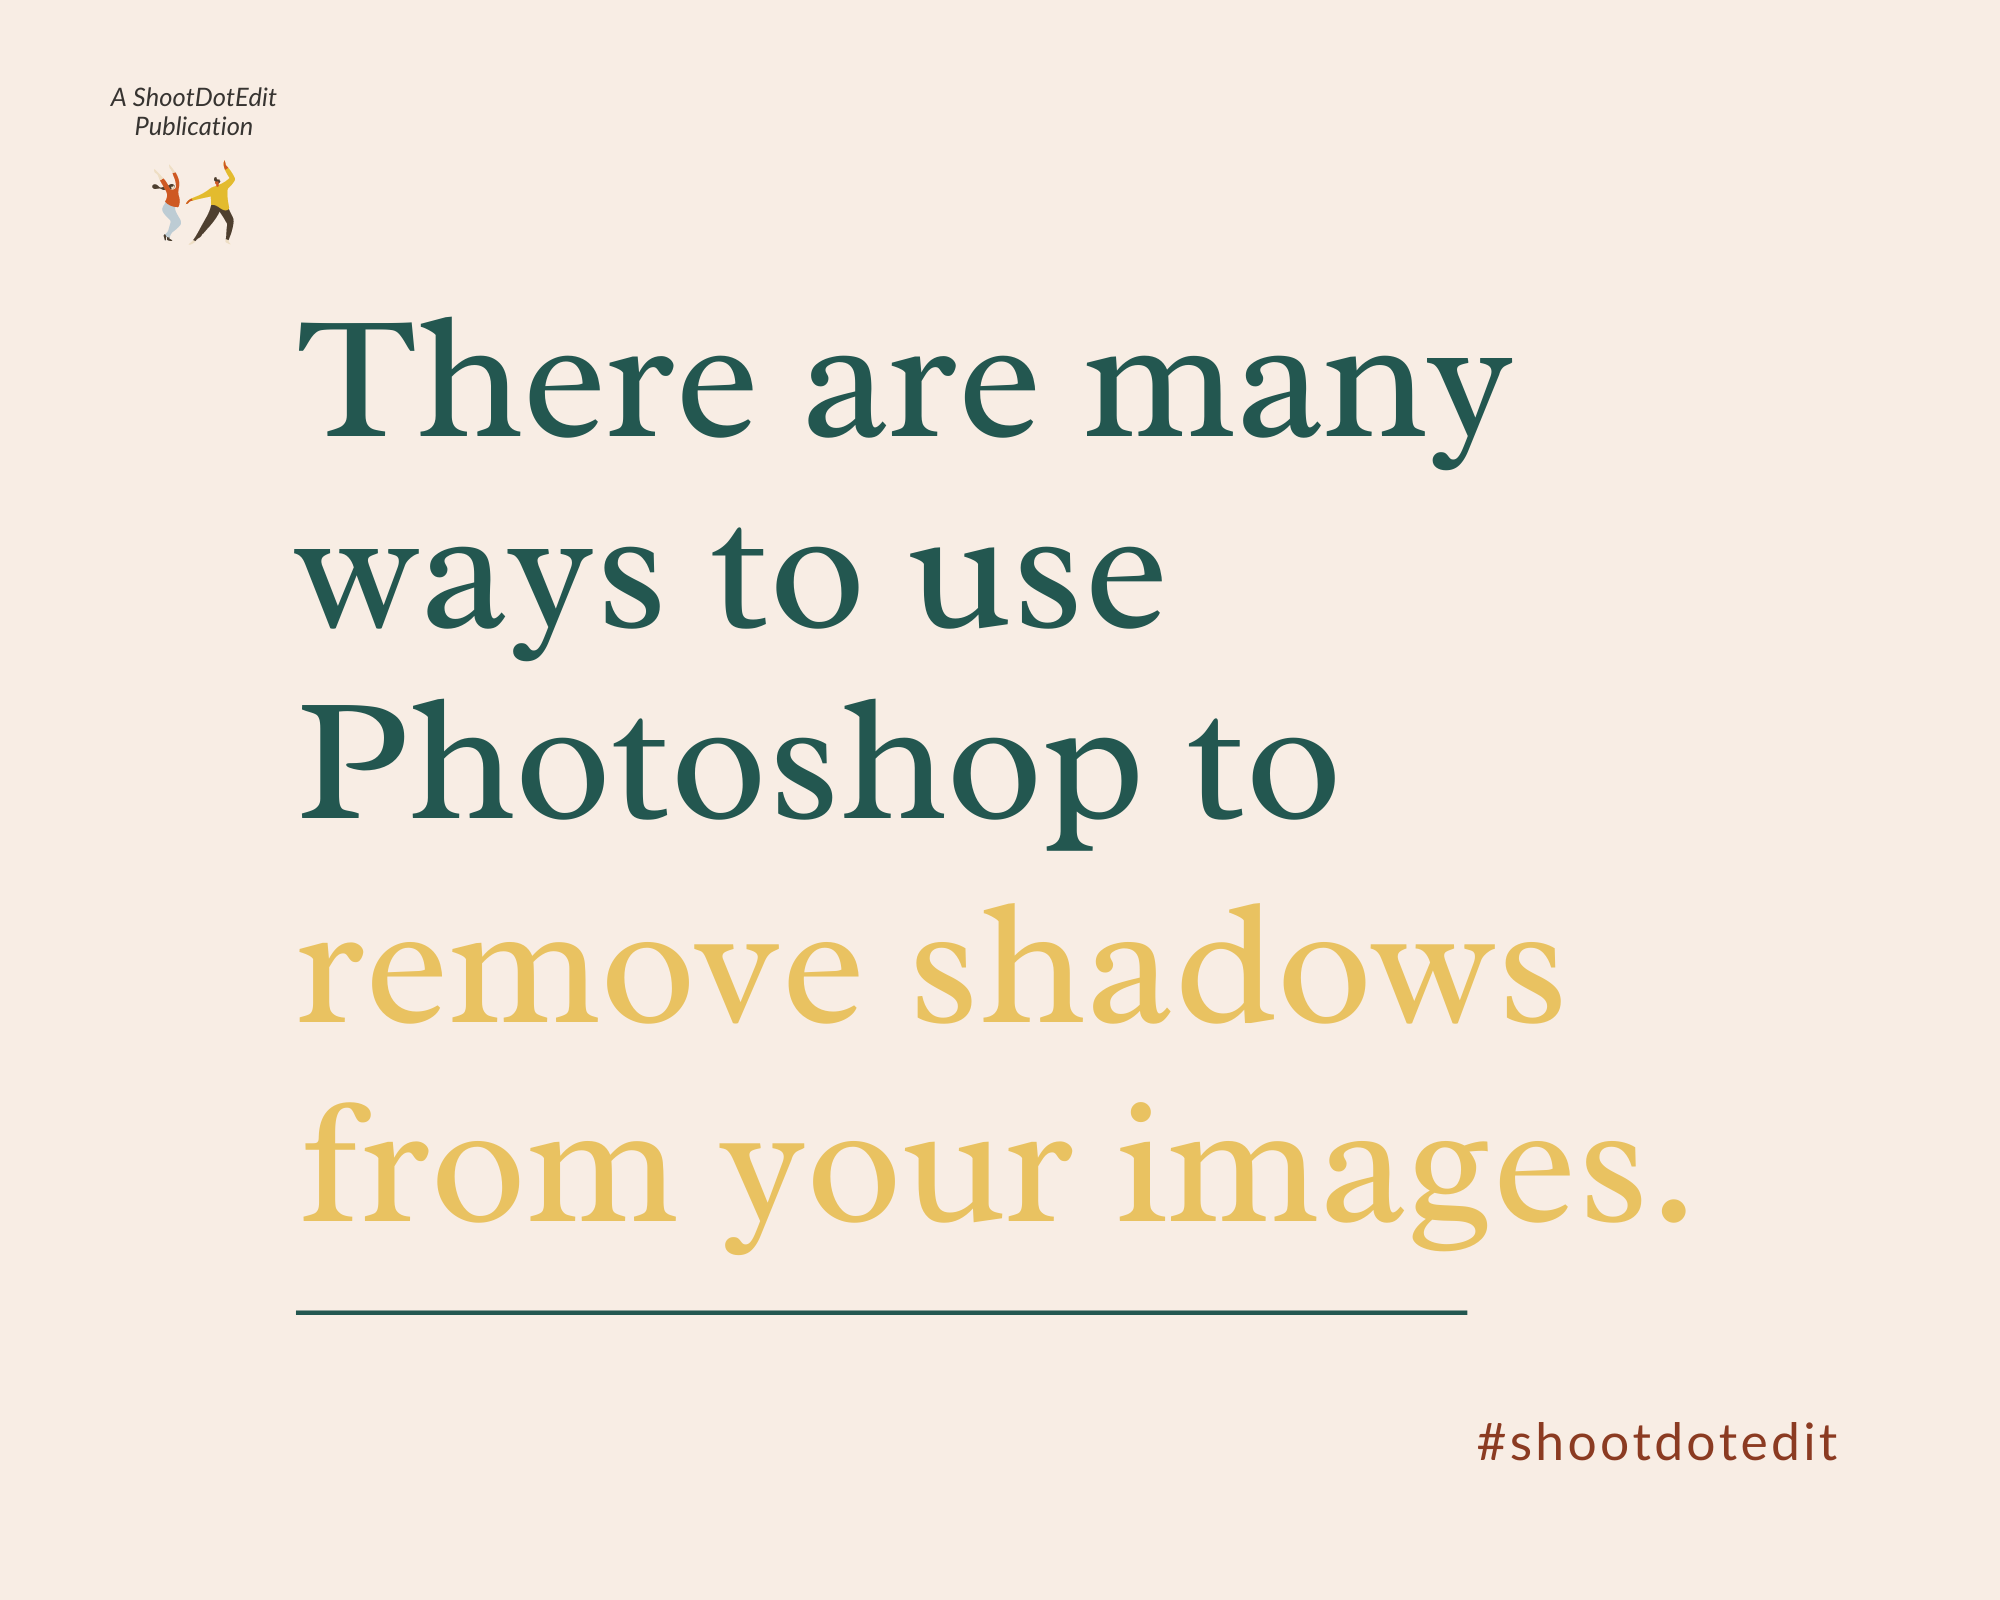 Infographic stating there are many ways to use Photoshop to remove shadows from your images